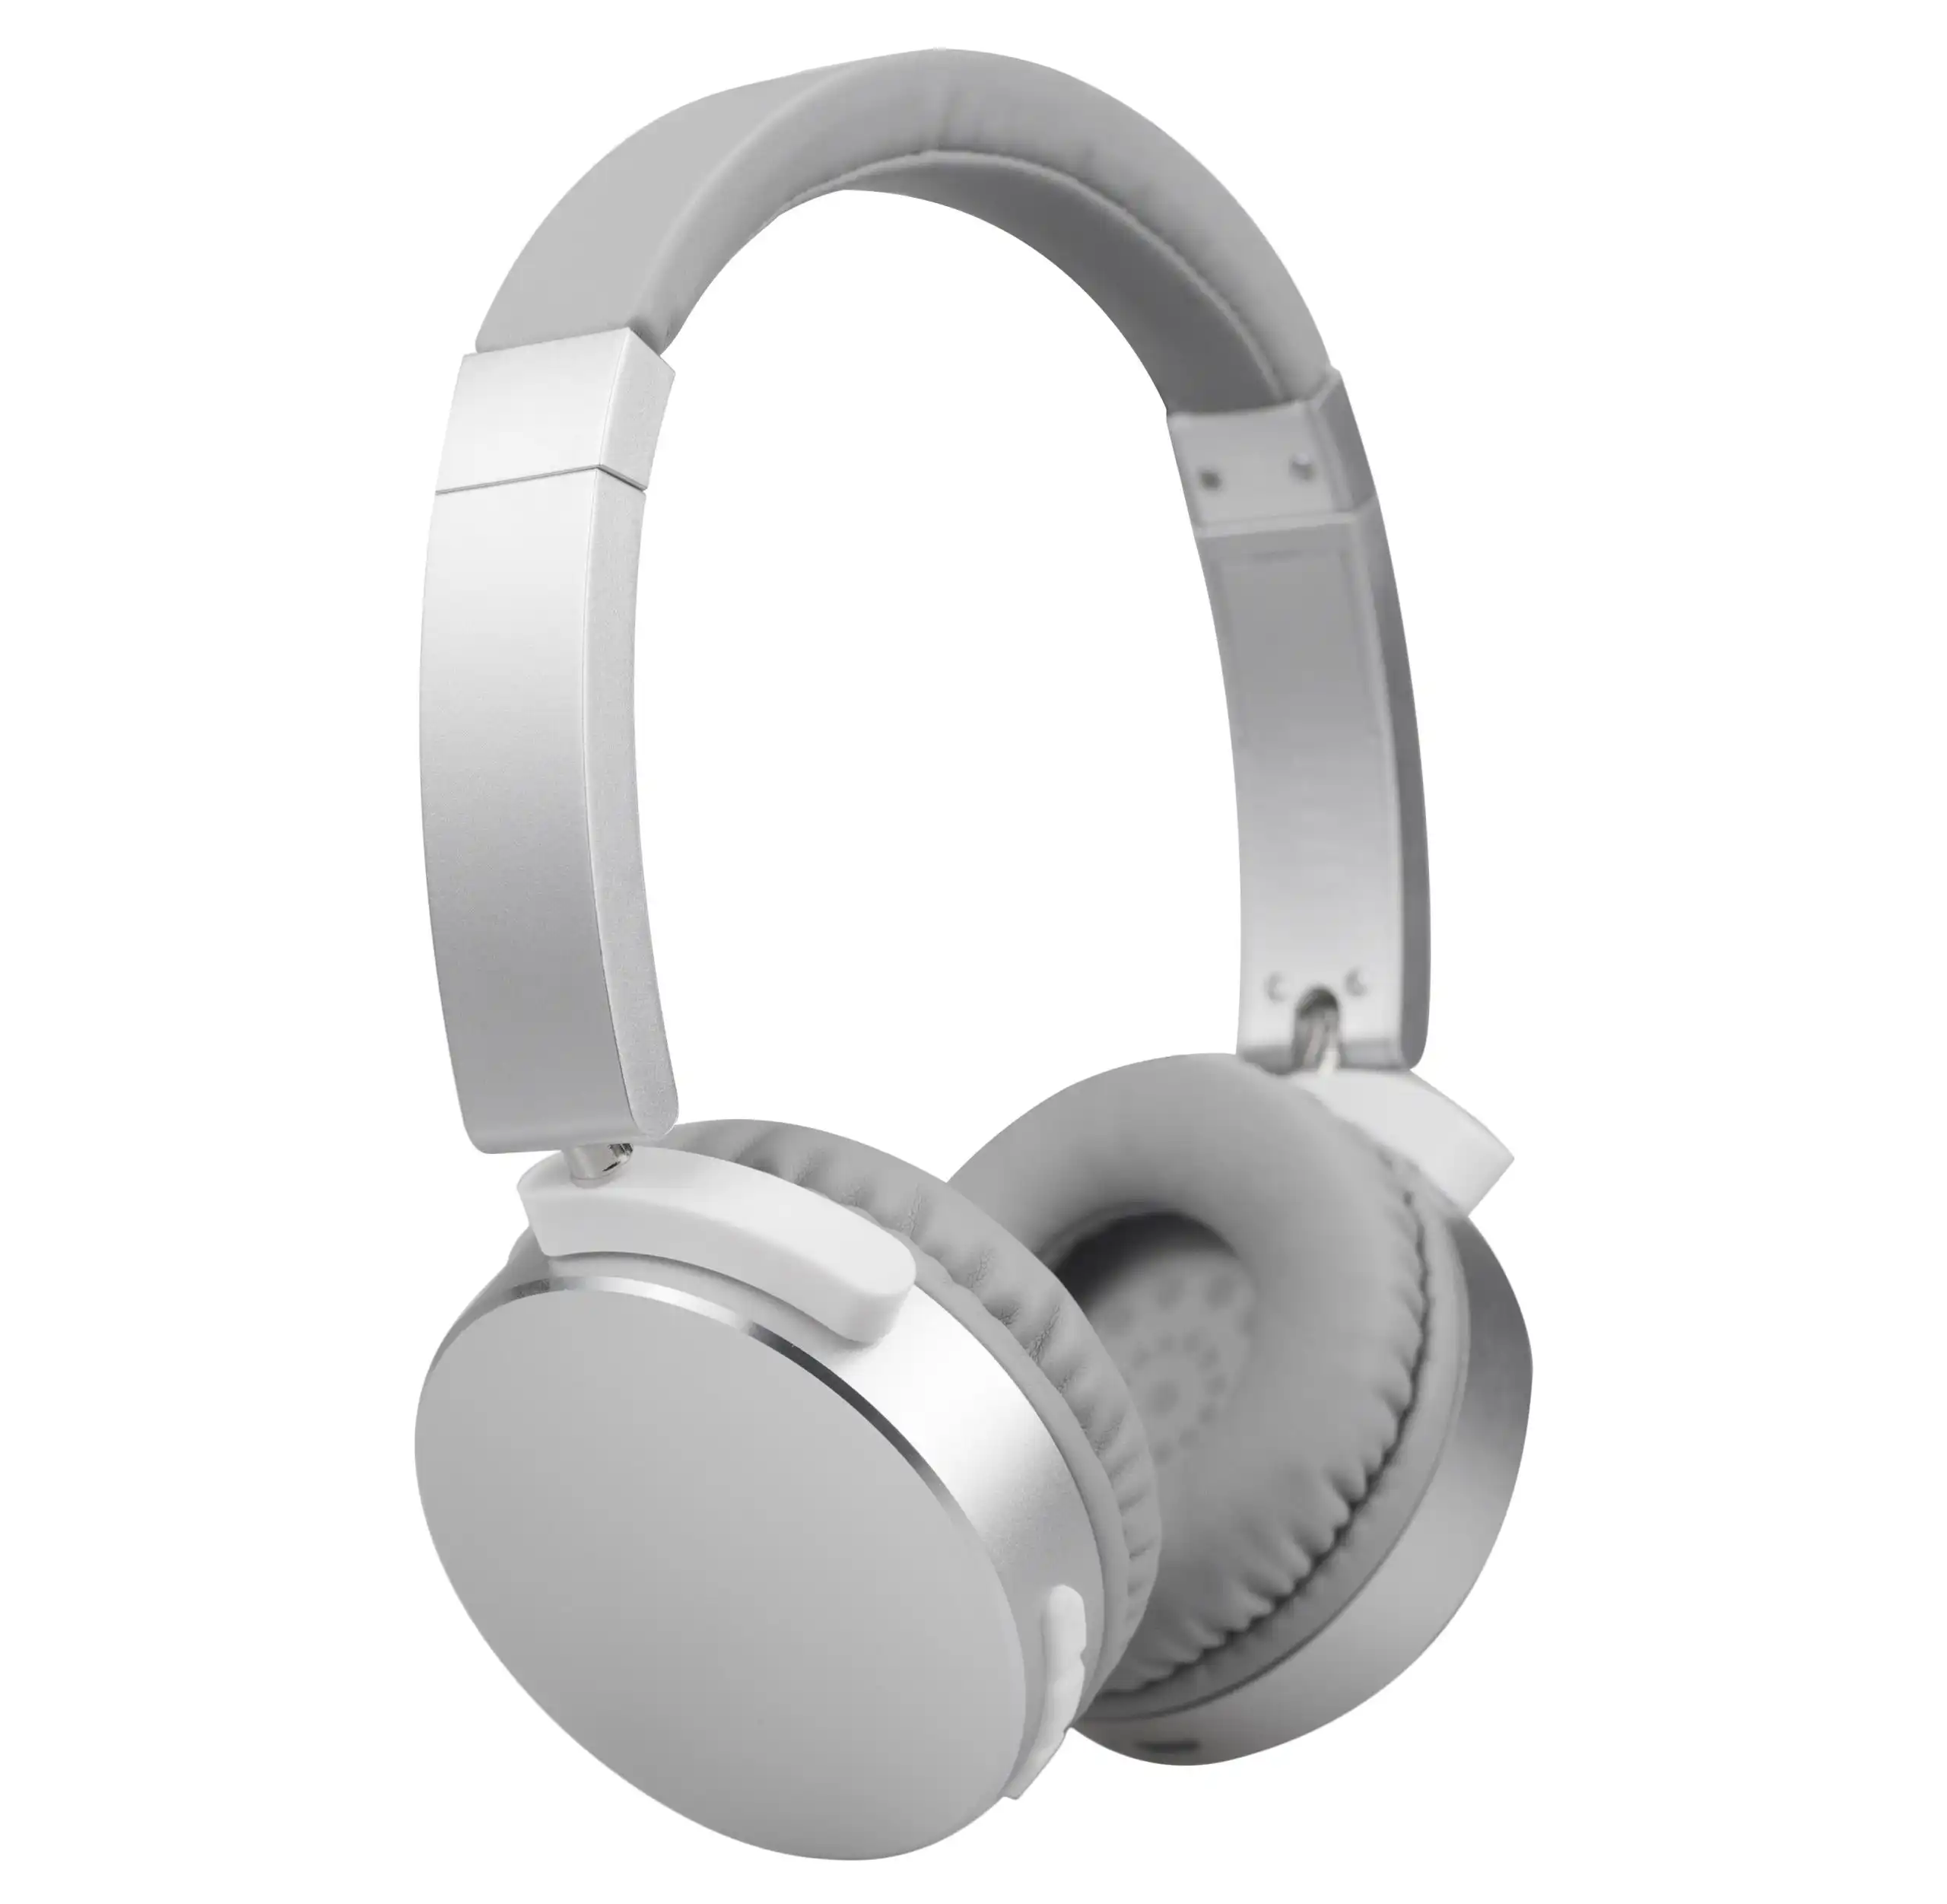 TODO Stereo Bluetooth 5.0 Headphone Earphones Rechargeable Battery Neodymium Driver - Silver